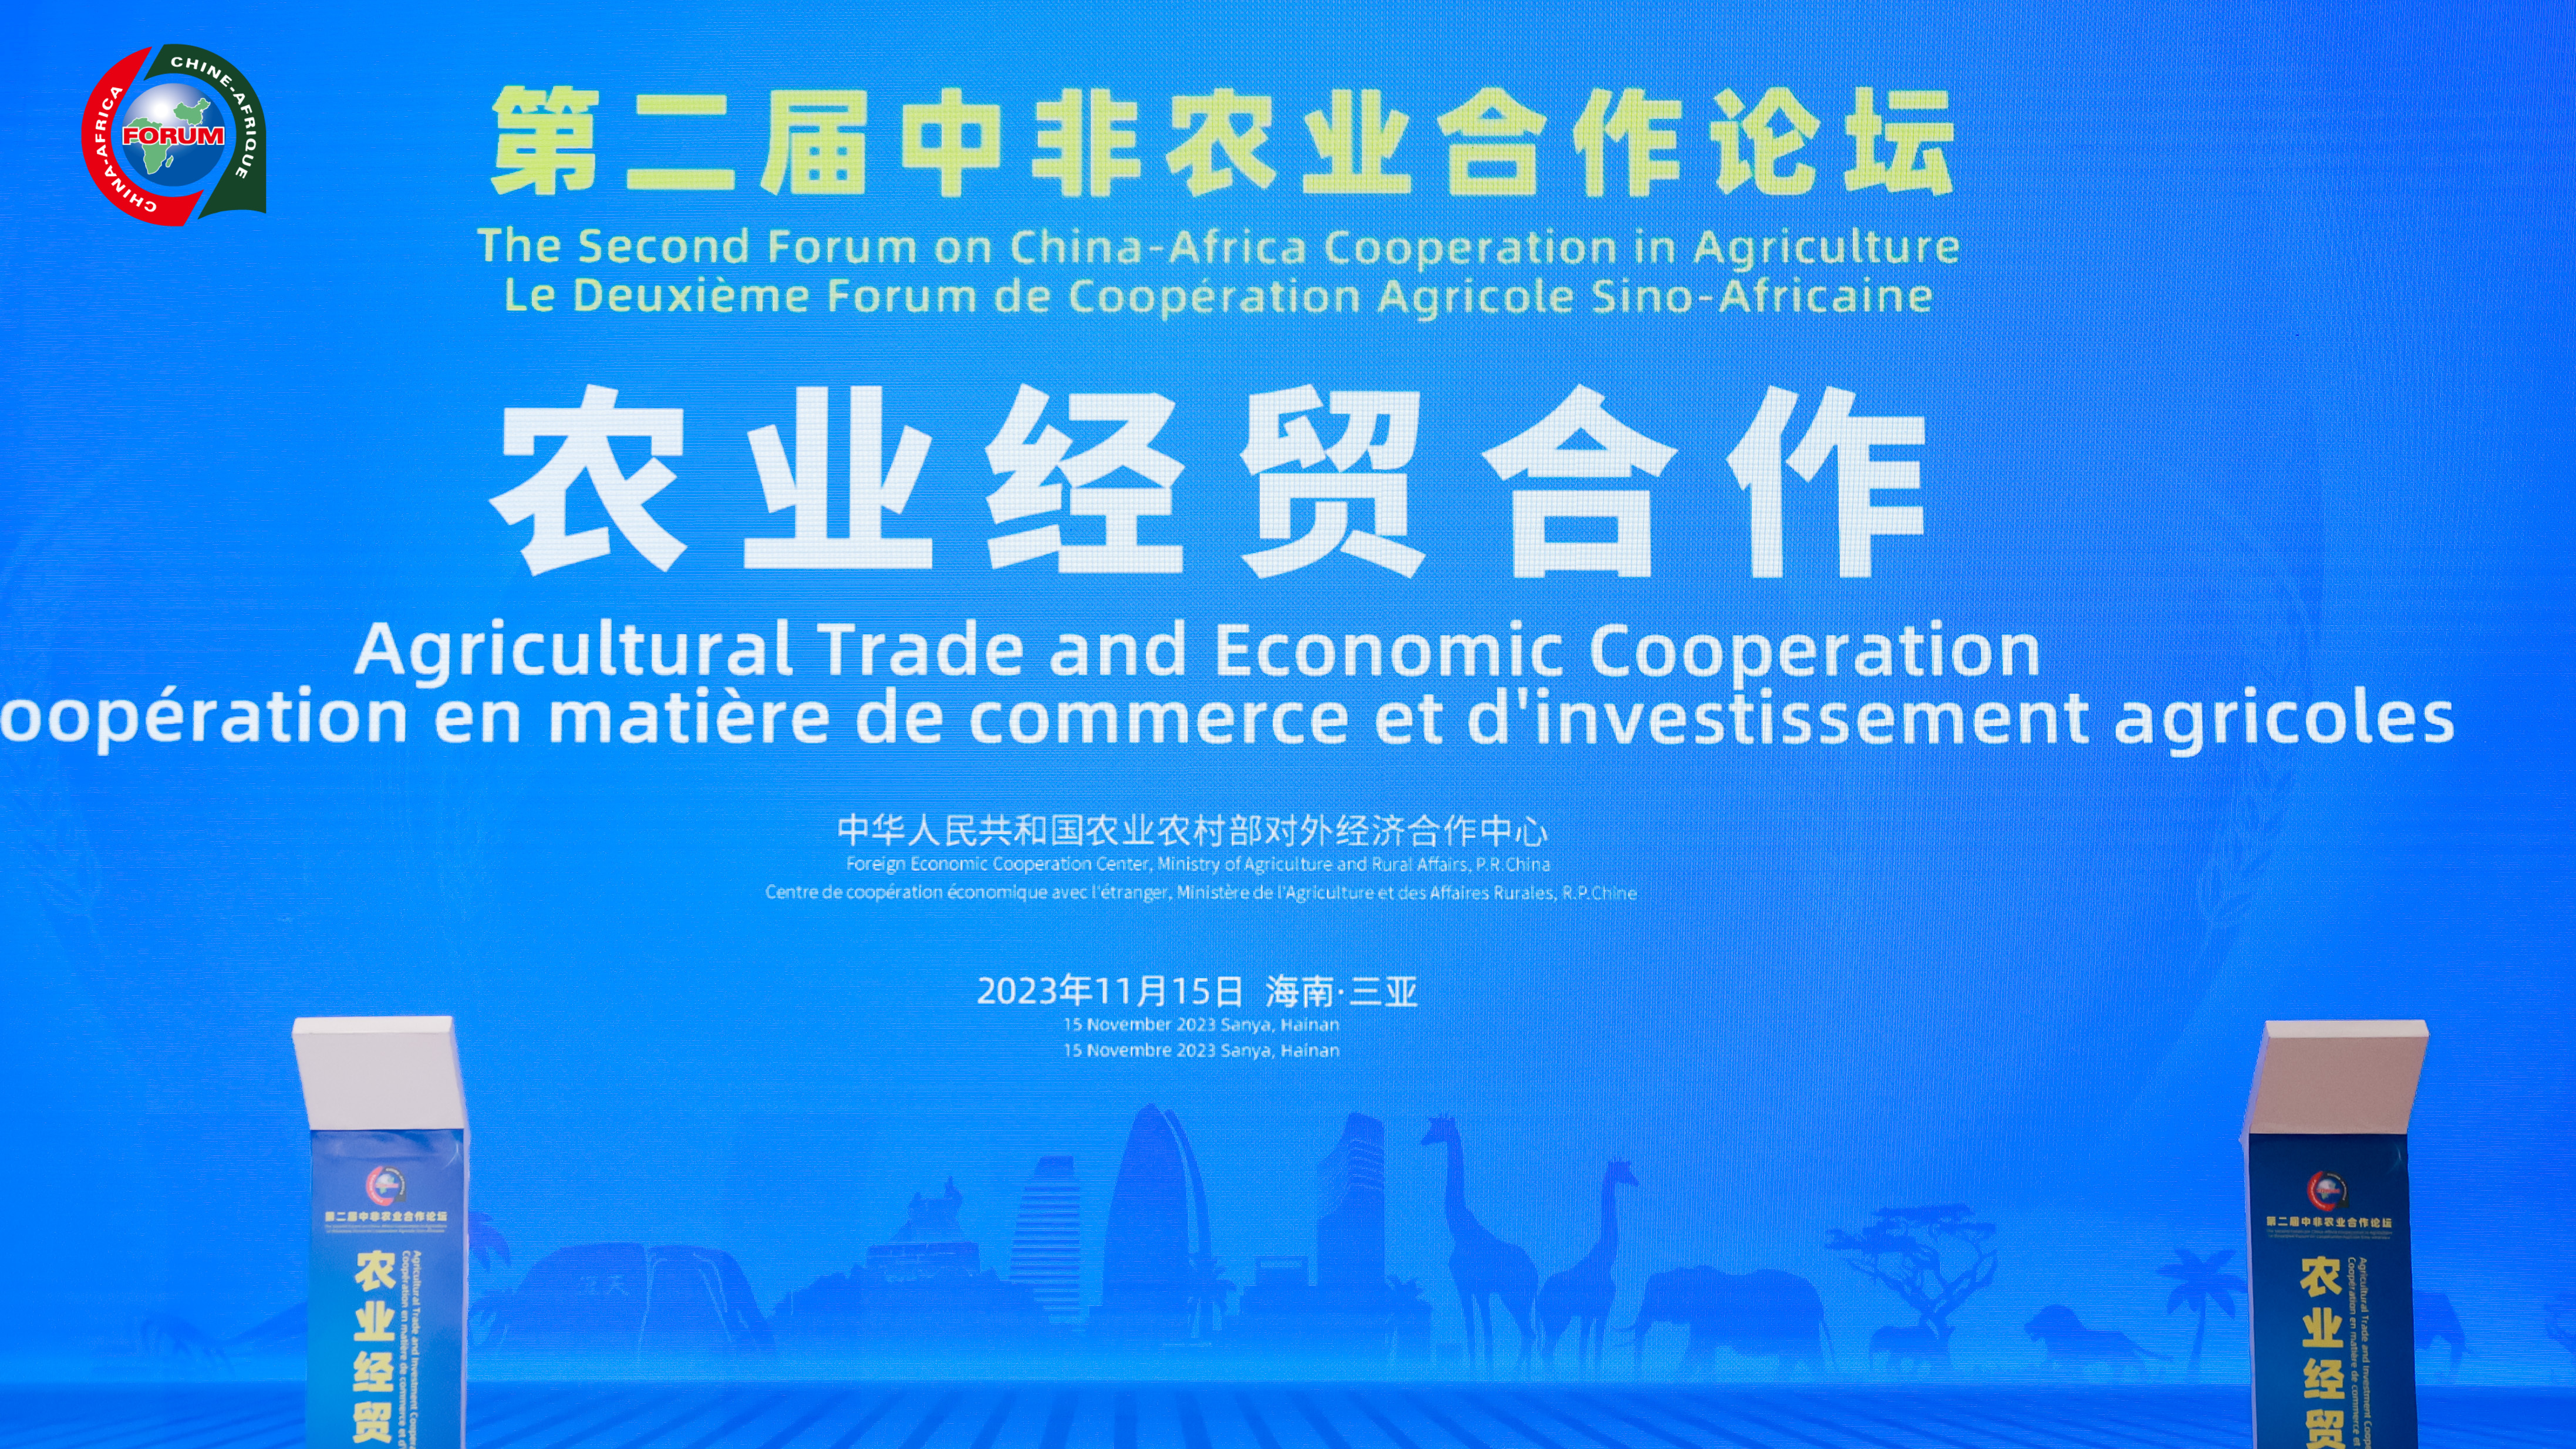 Agricultural Trade and Economic Cooperation sub-forum of second Forum on China-Africa Cooperation (FOCAC) in Agriculture held in Sanya, China's Hainan Province, Nov. 15, 2023.